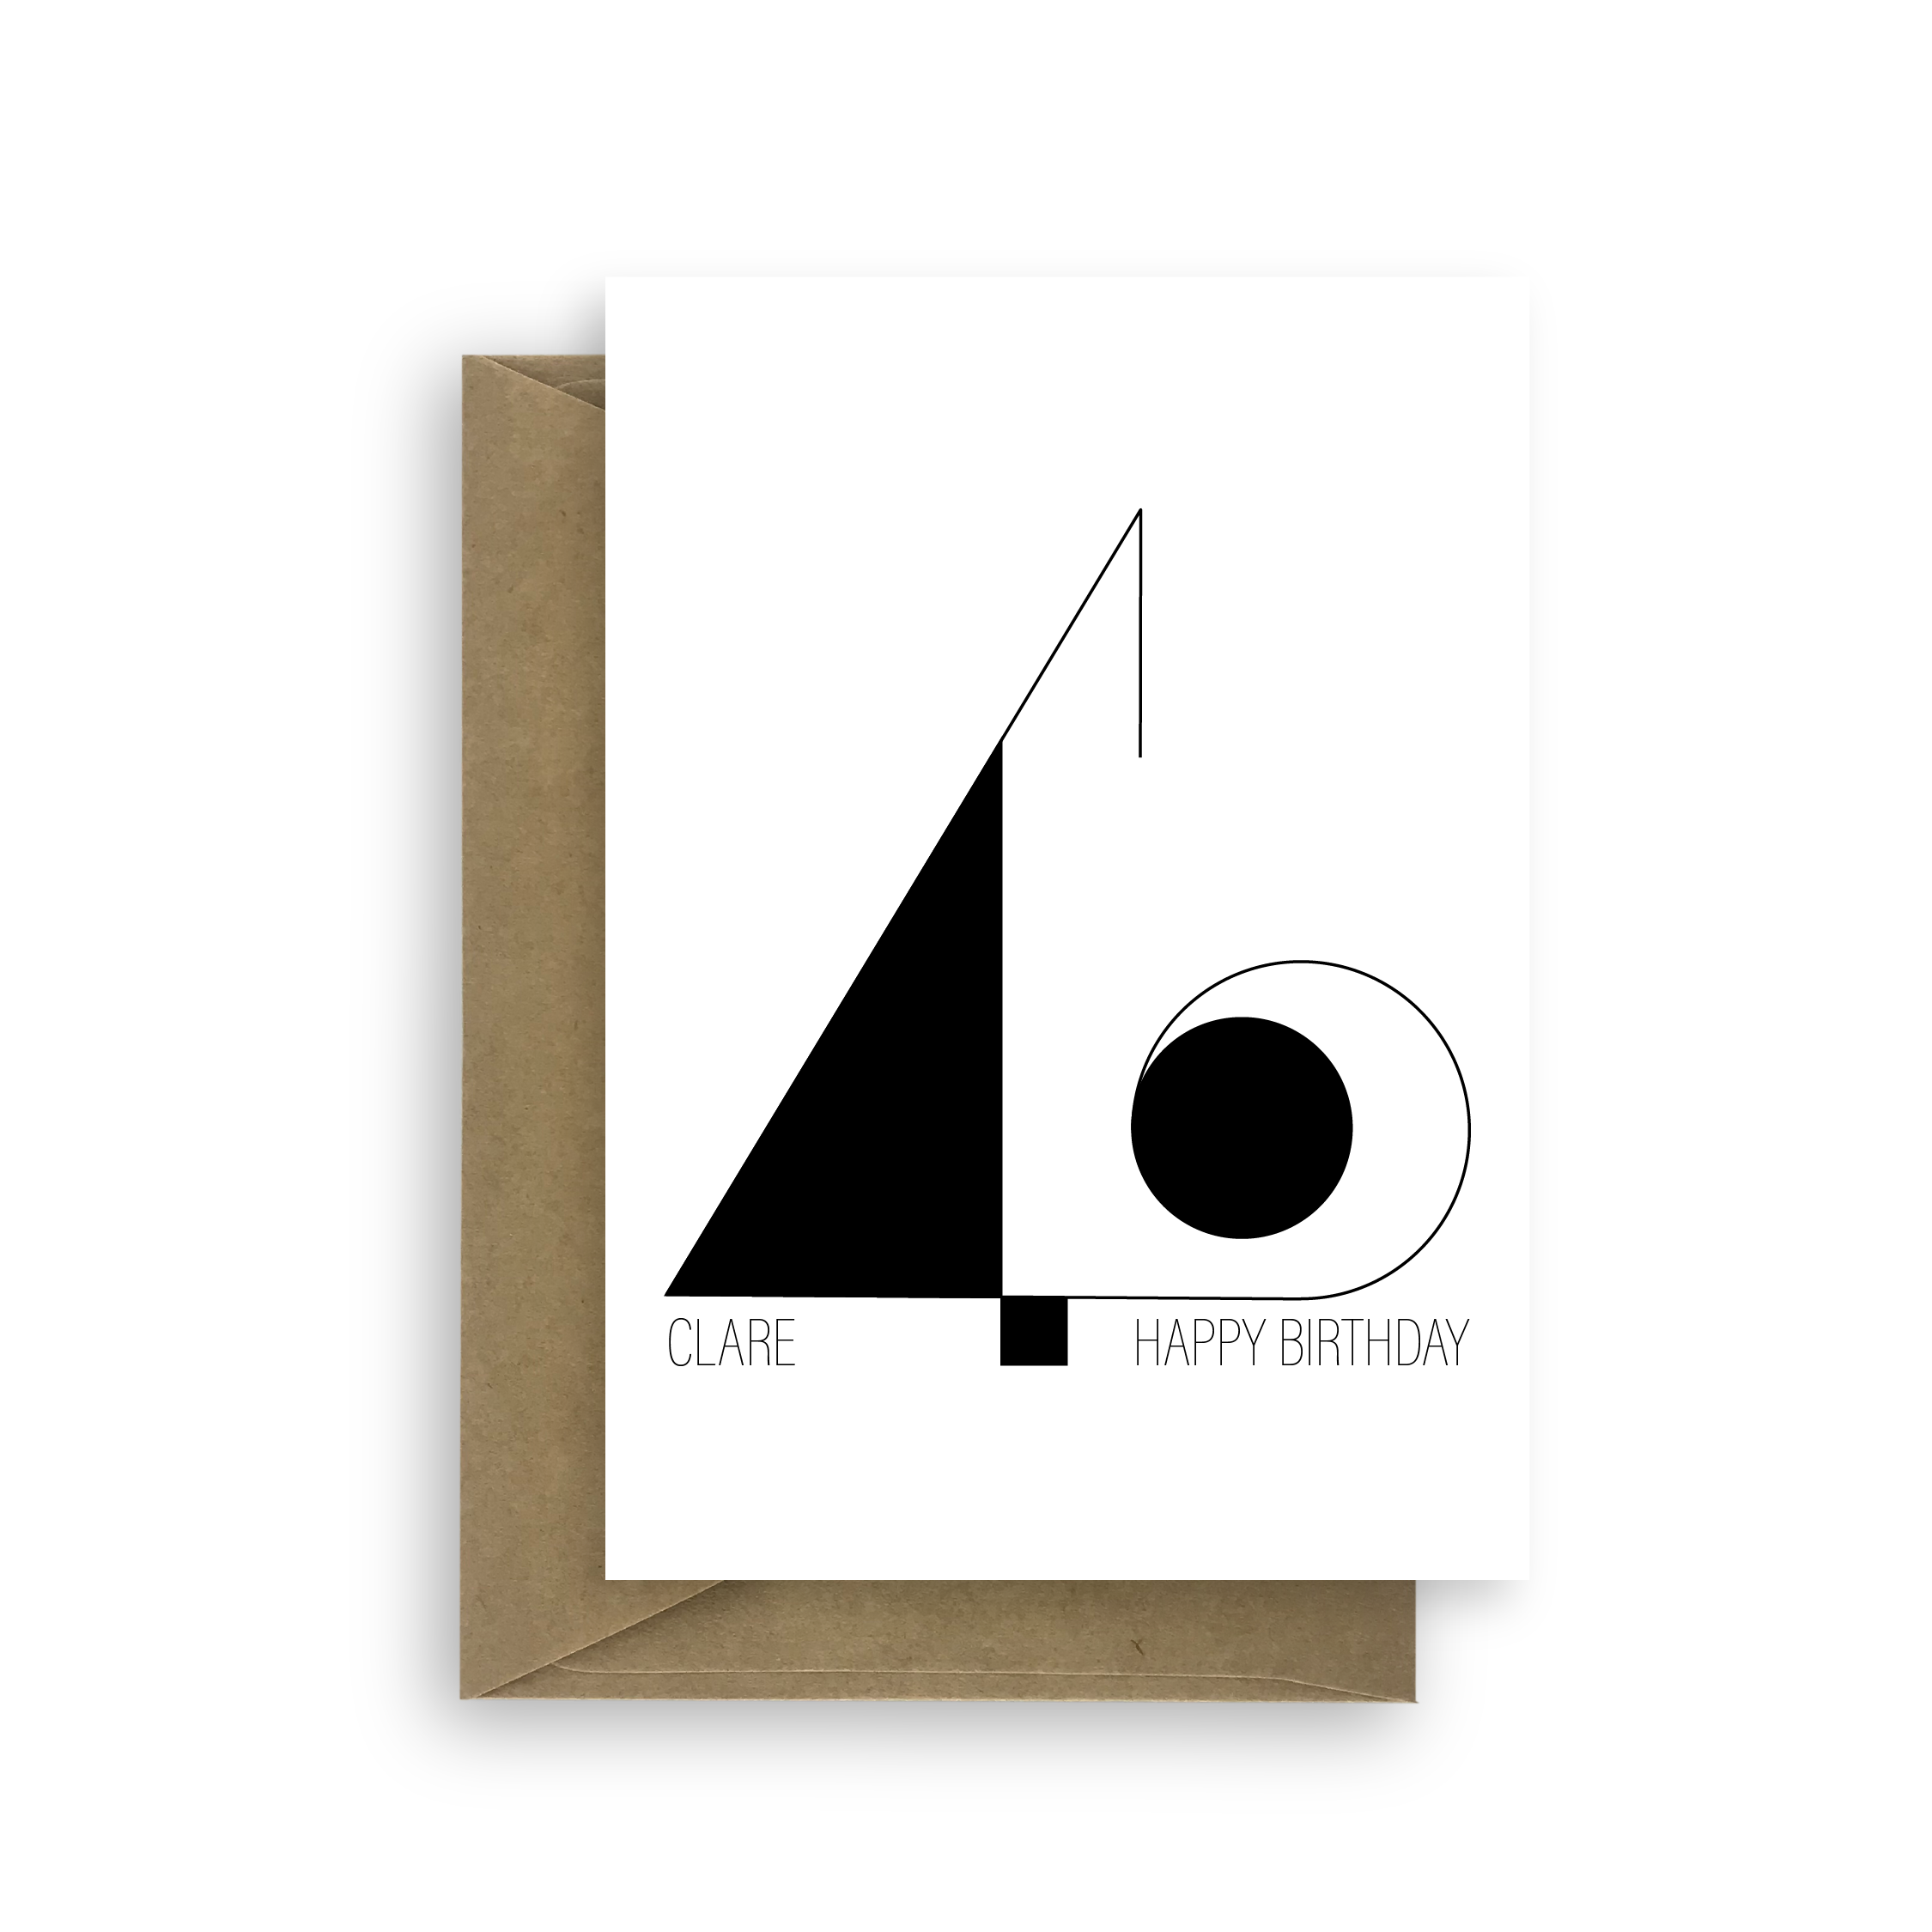 40th birthday card minimalist design - thin black lines and solid black shapes for 40, includes recipients name bb040